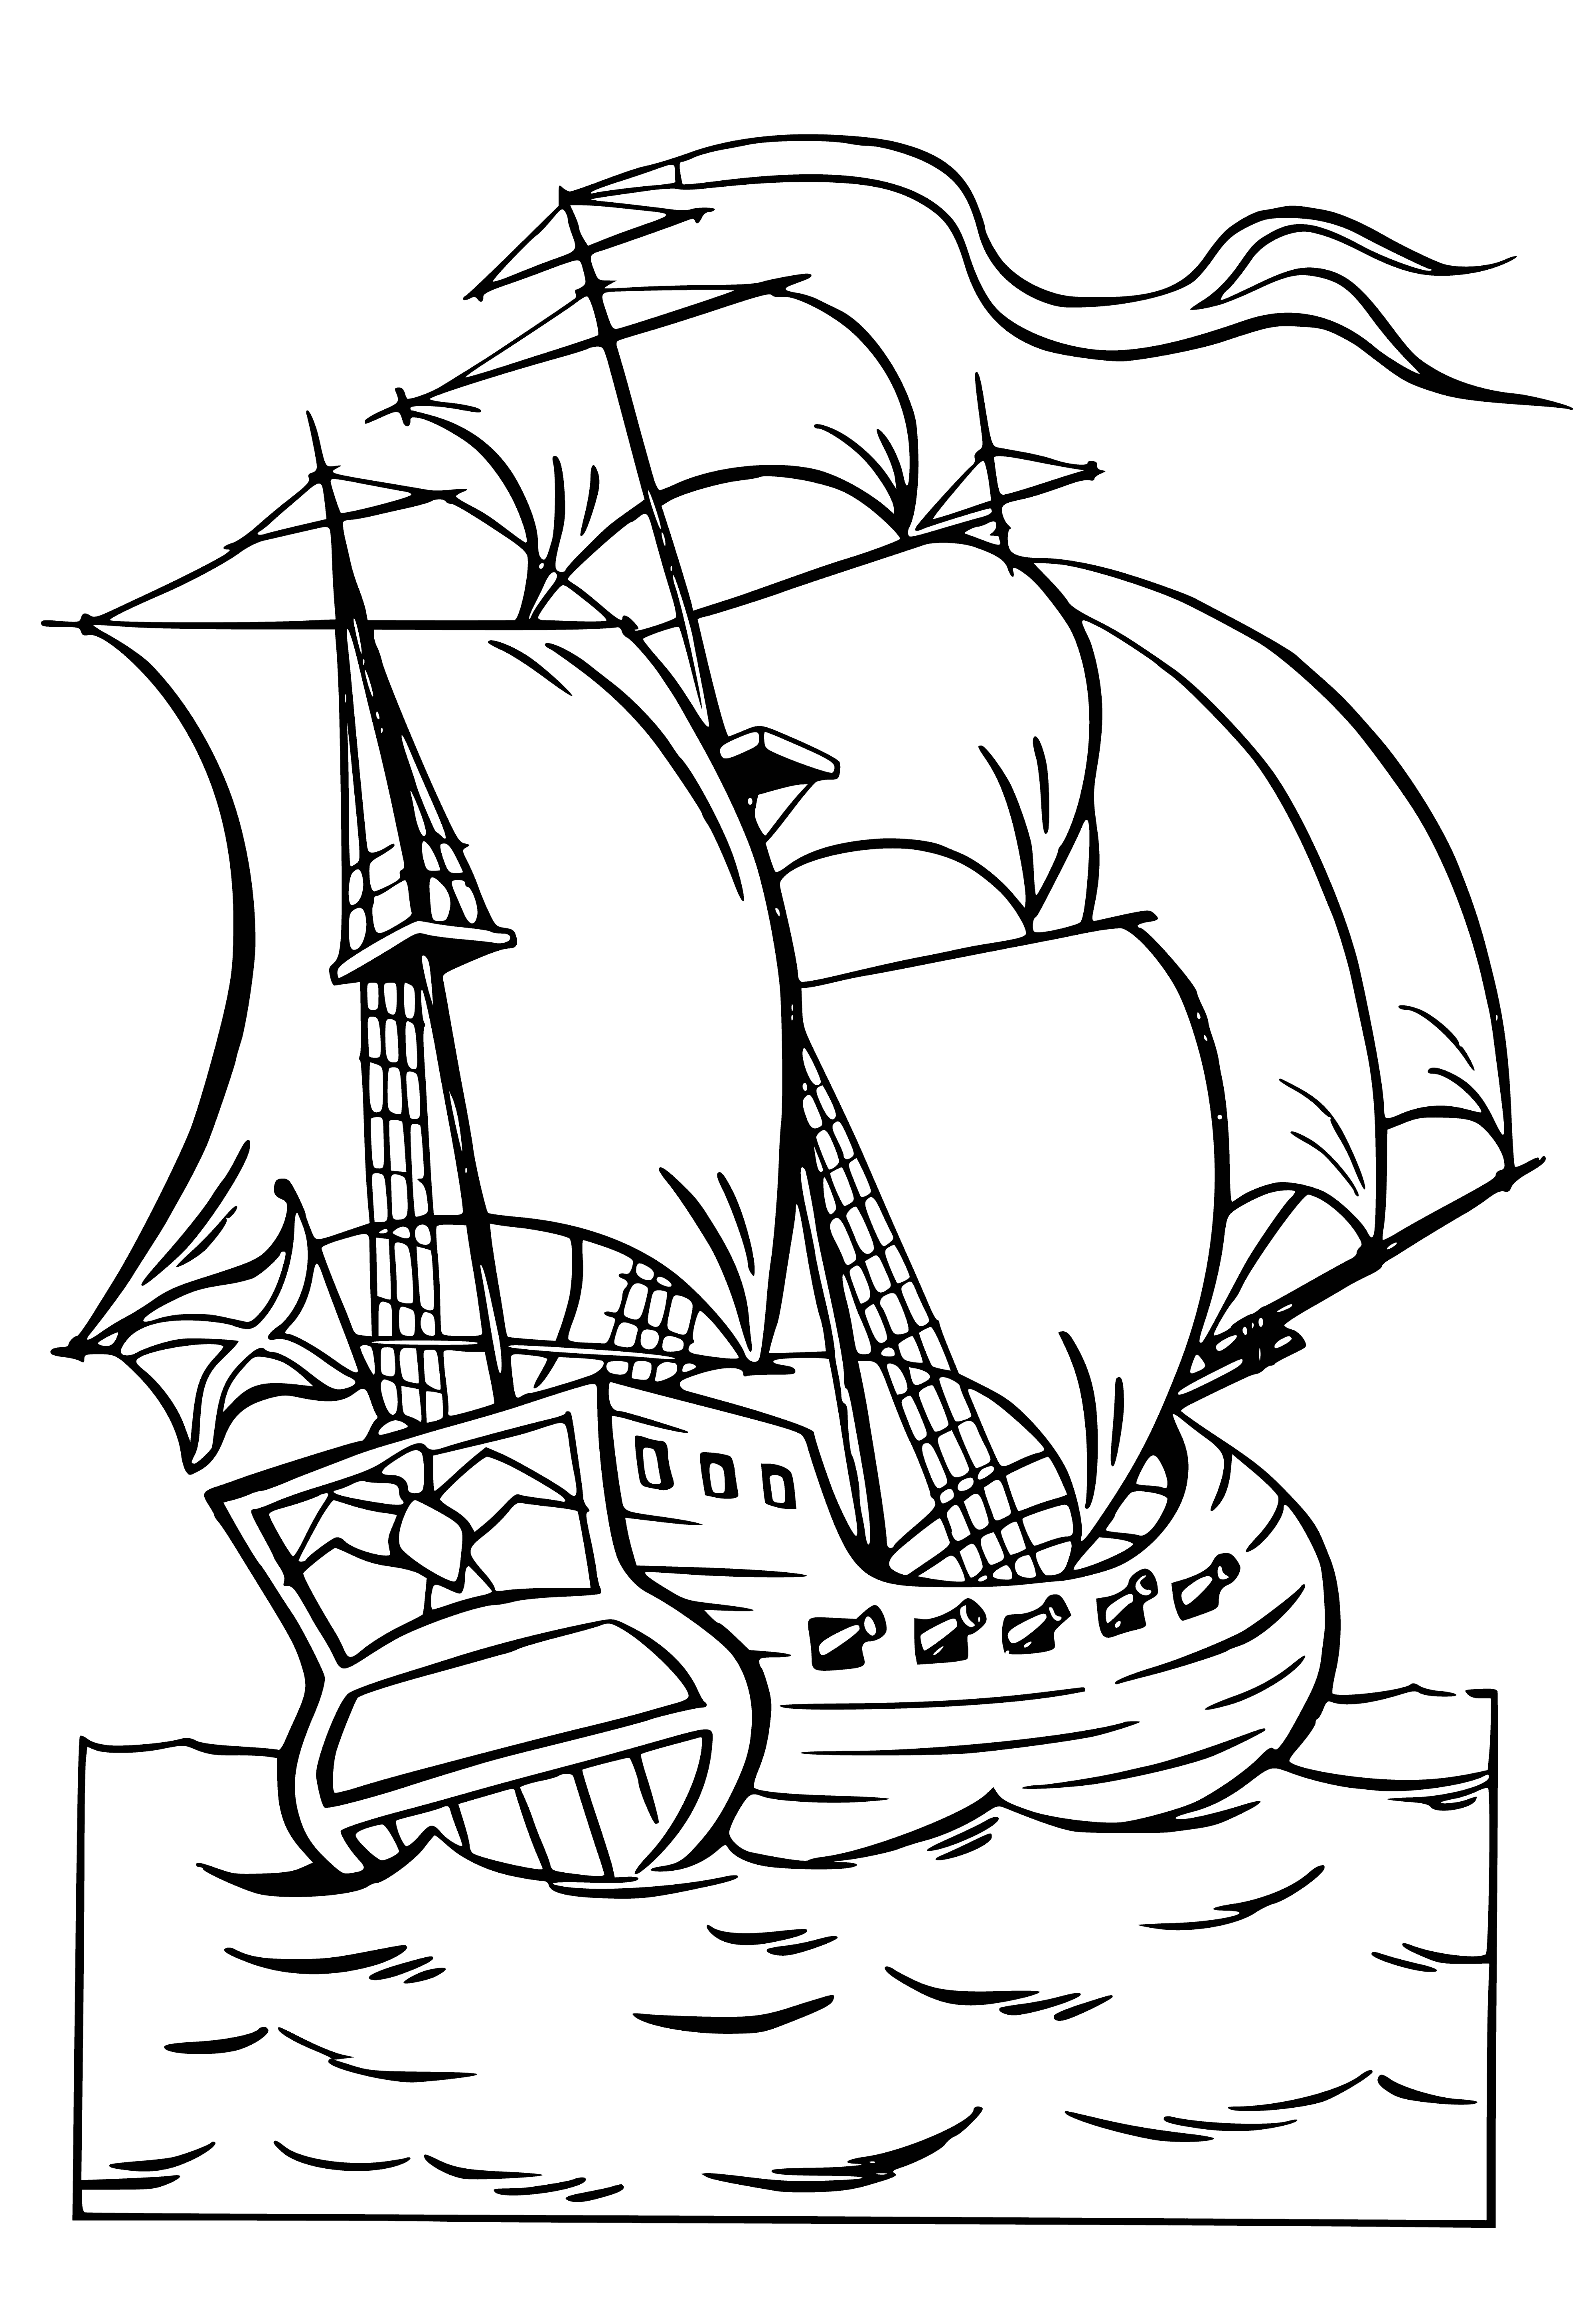 Merchant ships coloring page